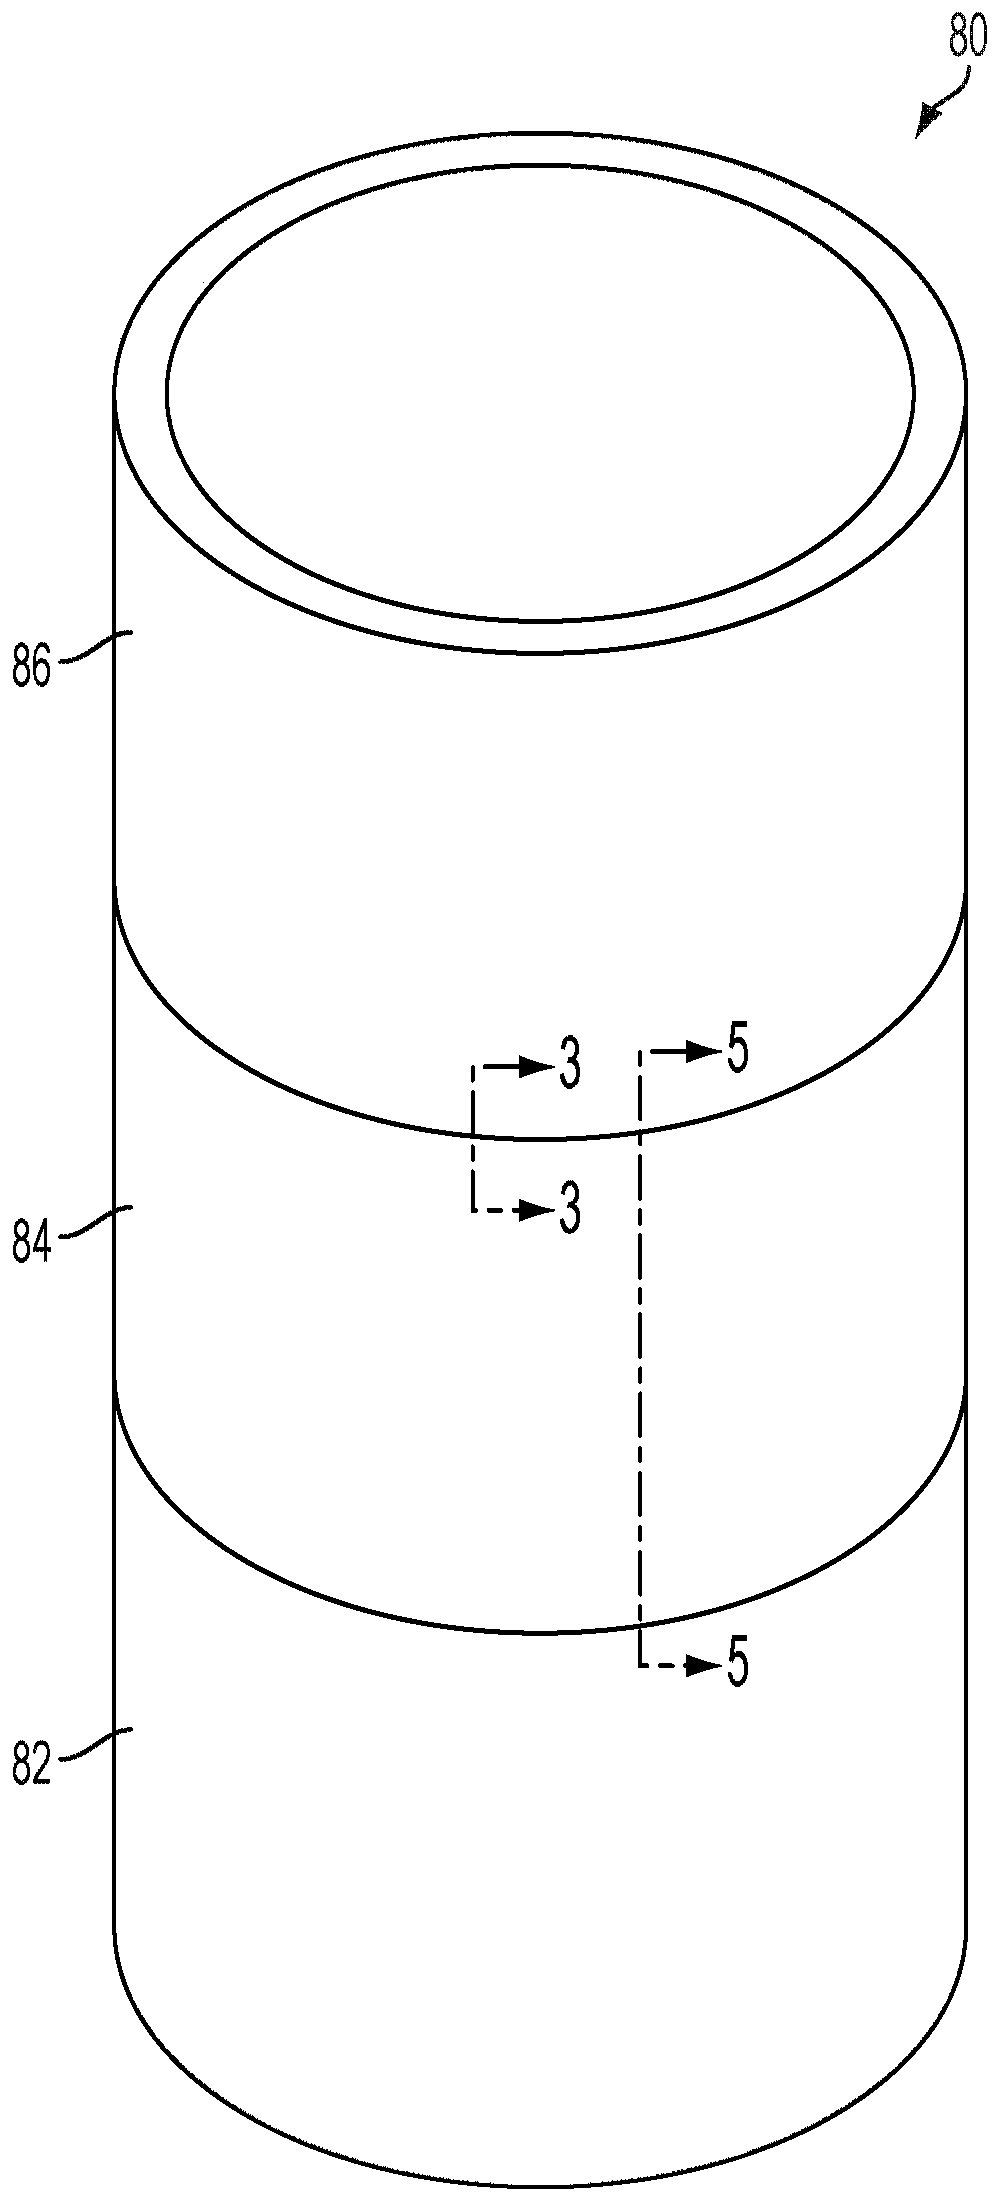 Joint Design of Segmented Silicon Carbide Lining in Fluidized Bed Reactor